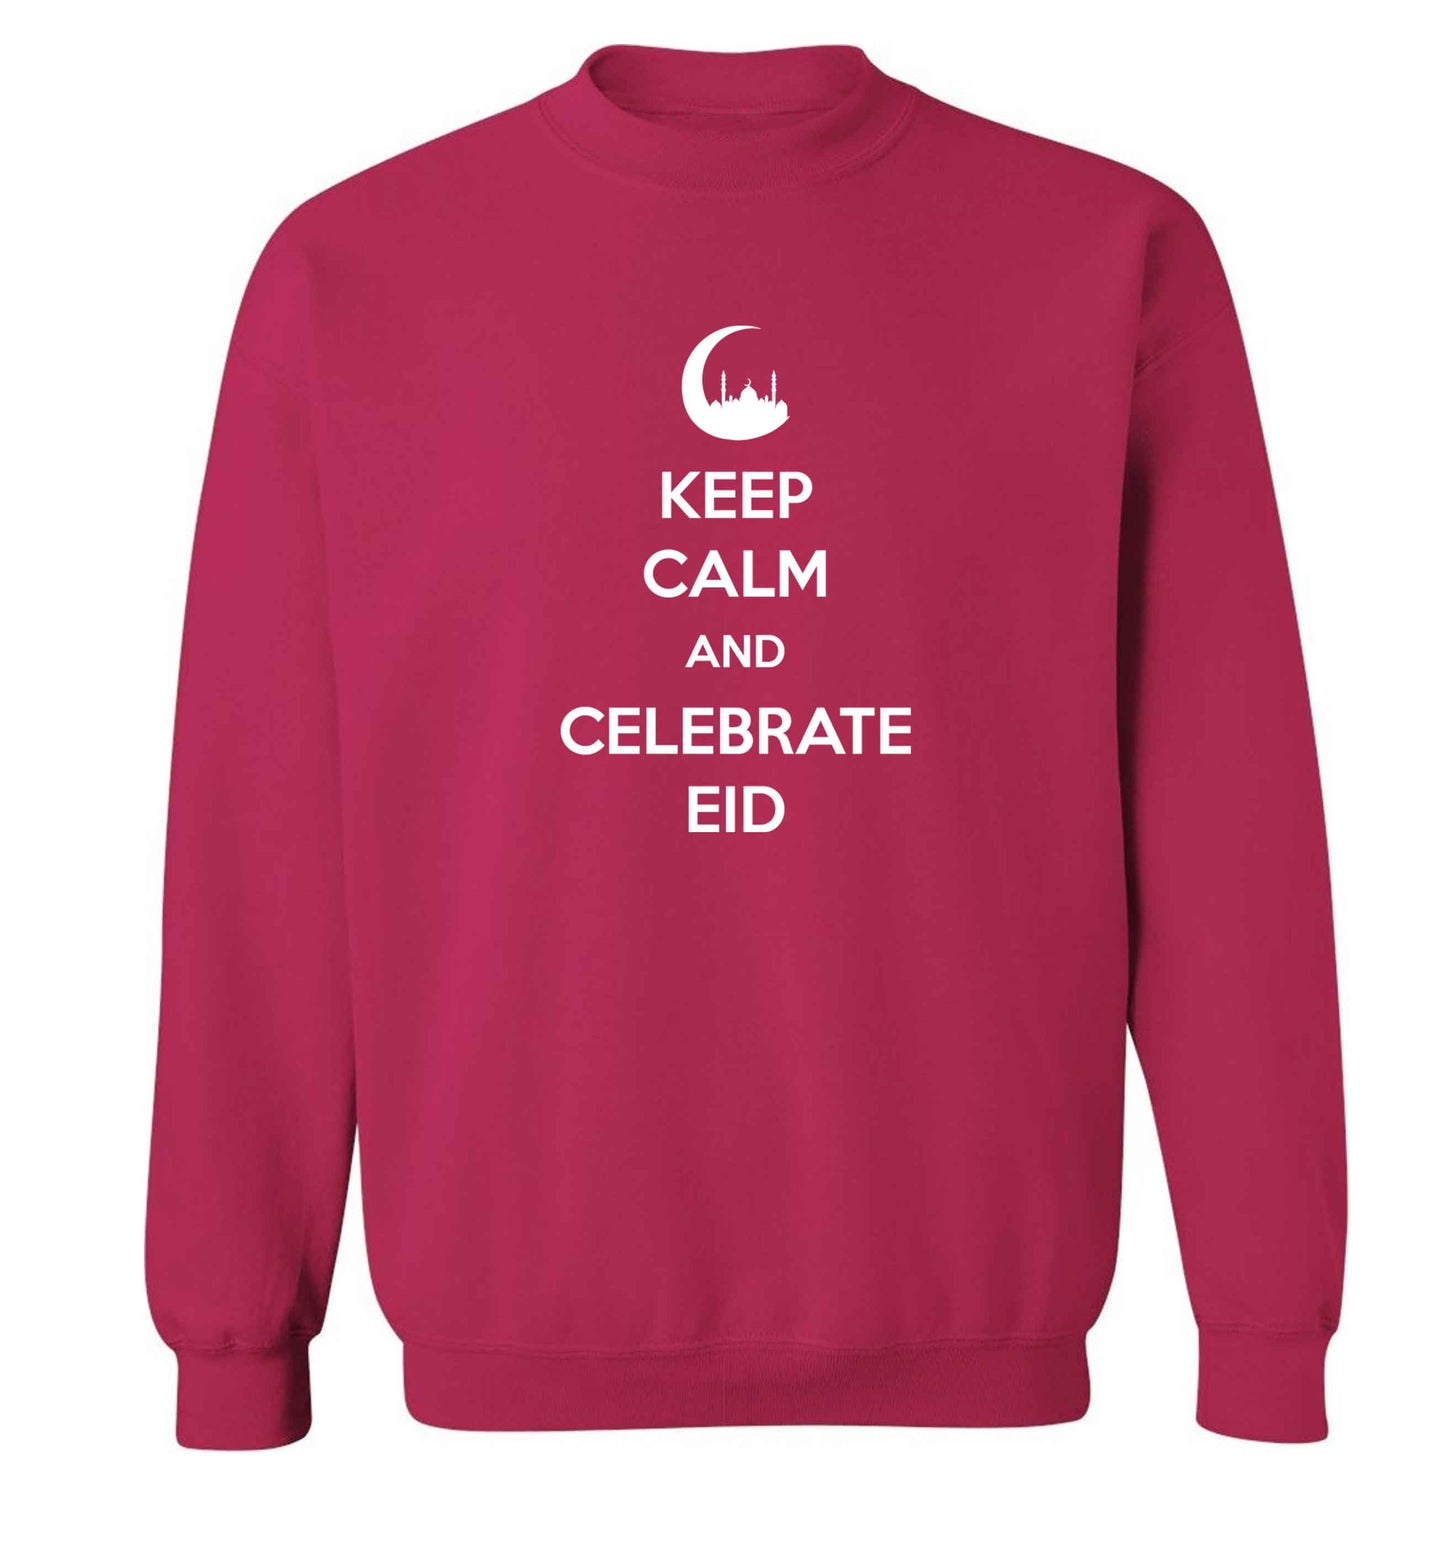 Keep calm and celebrate Eid adult's unisex pink sweater 2XL